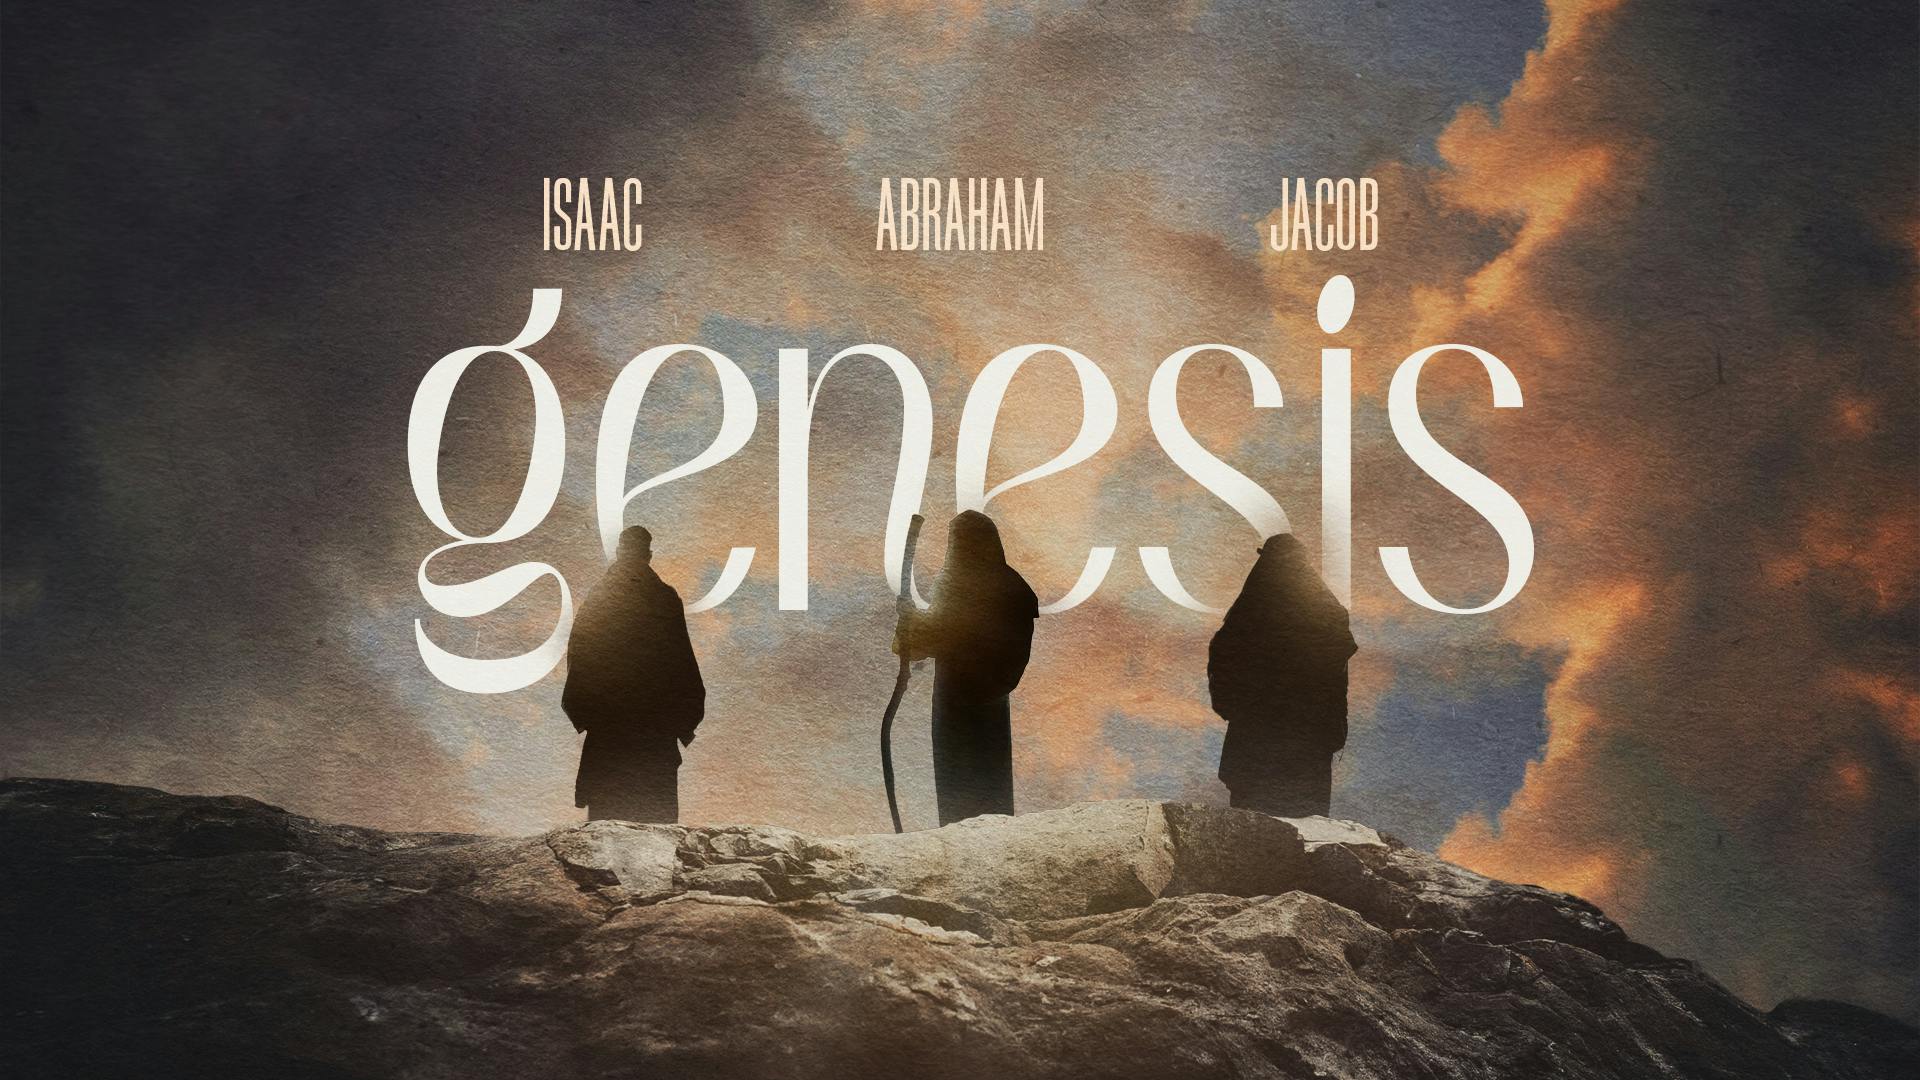 Genesis - Abraham, Isaac, and Jacob: Jacob and Rachel cover for post